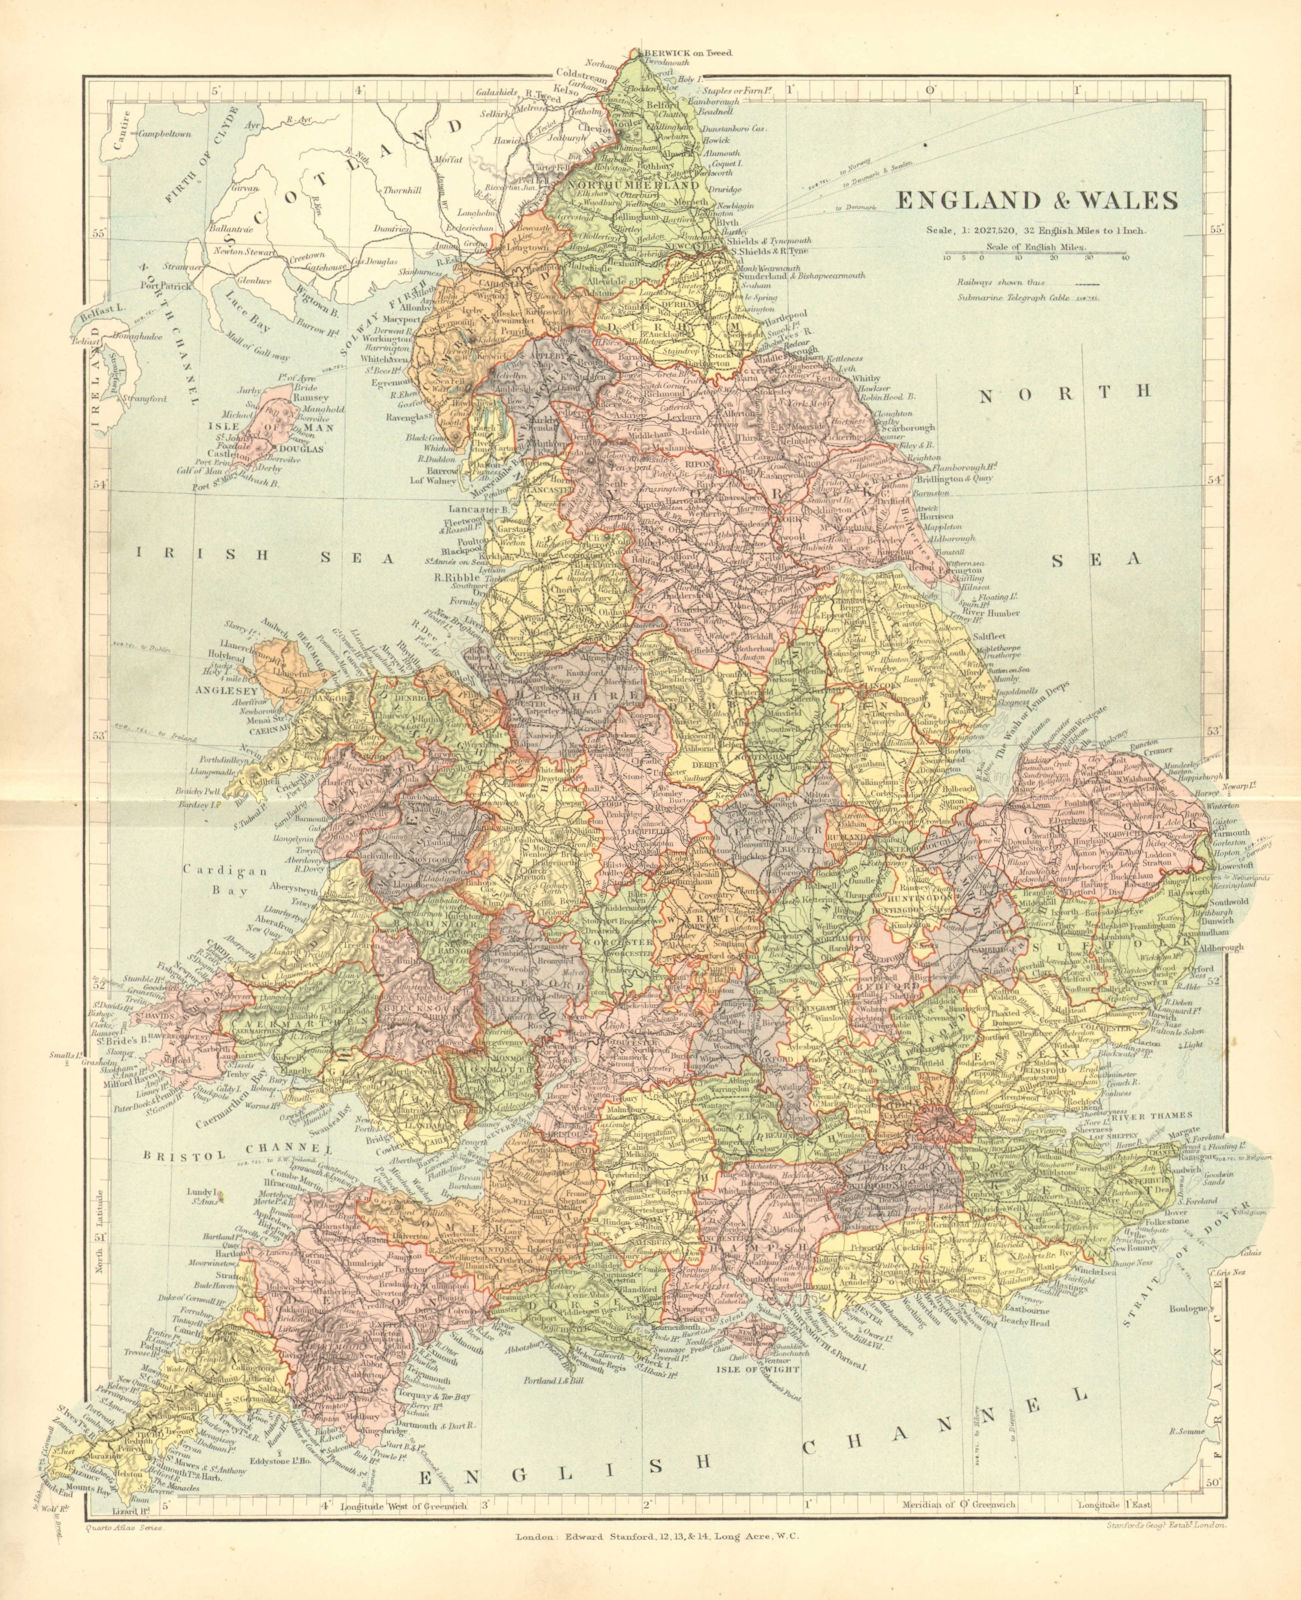 ENGLAND & WALES. showing counties, towns railways. STANFORD 1906 old map